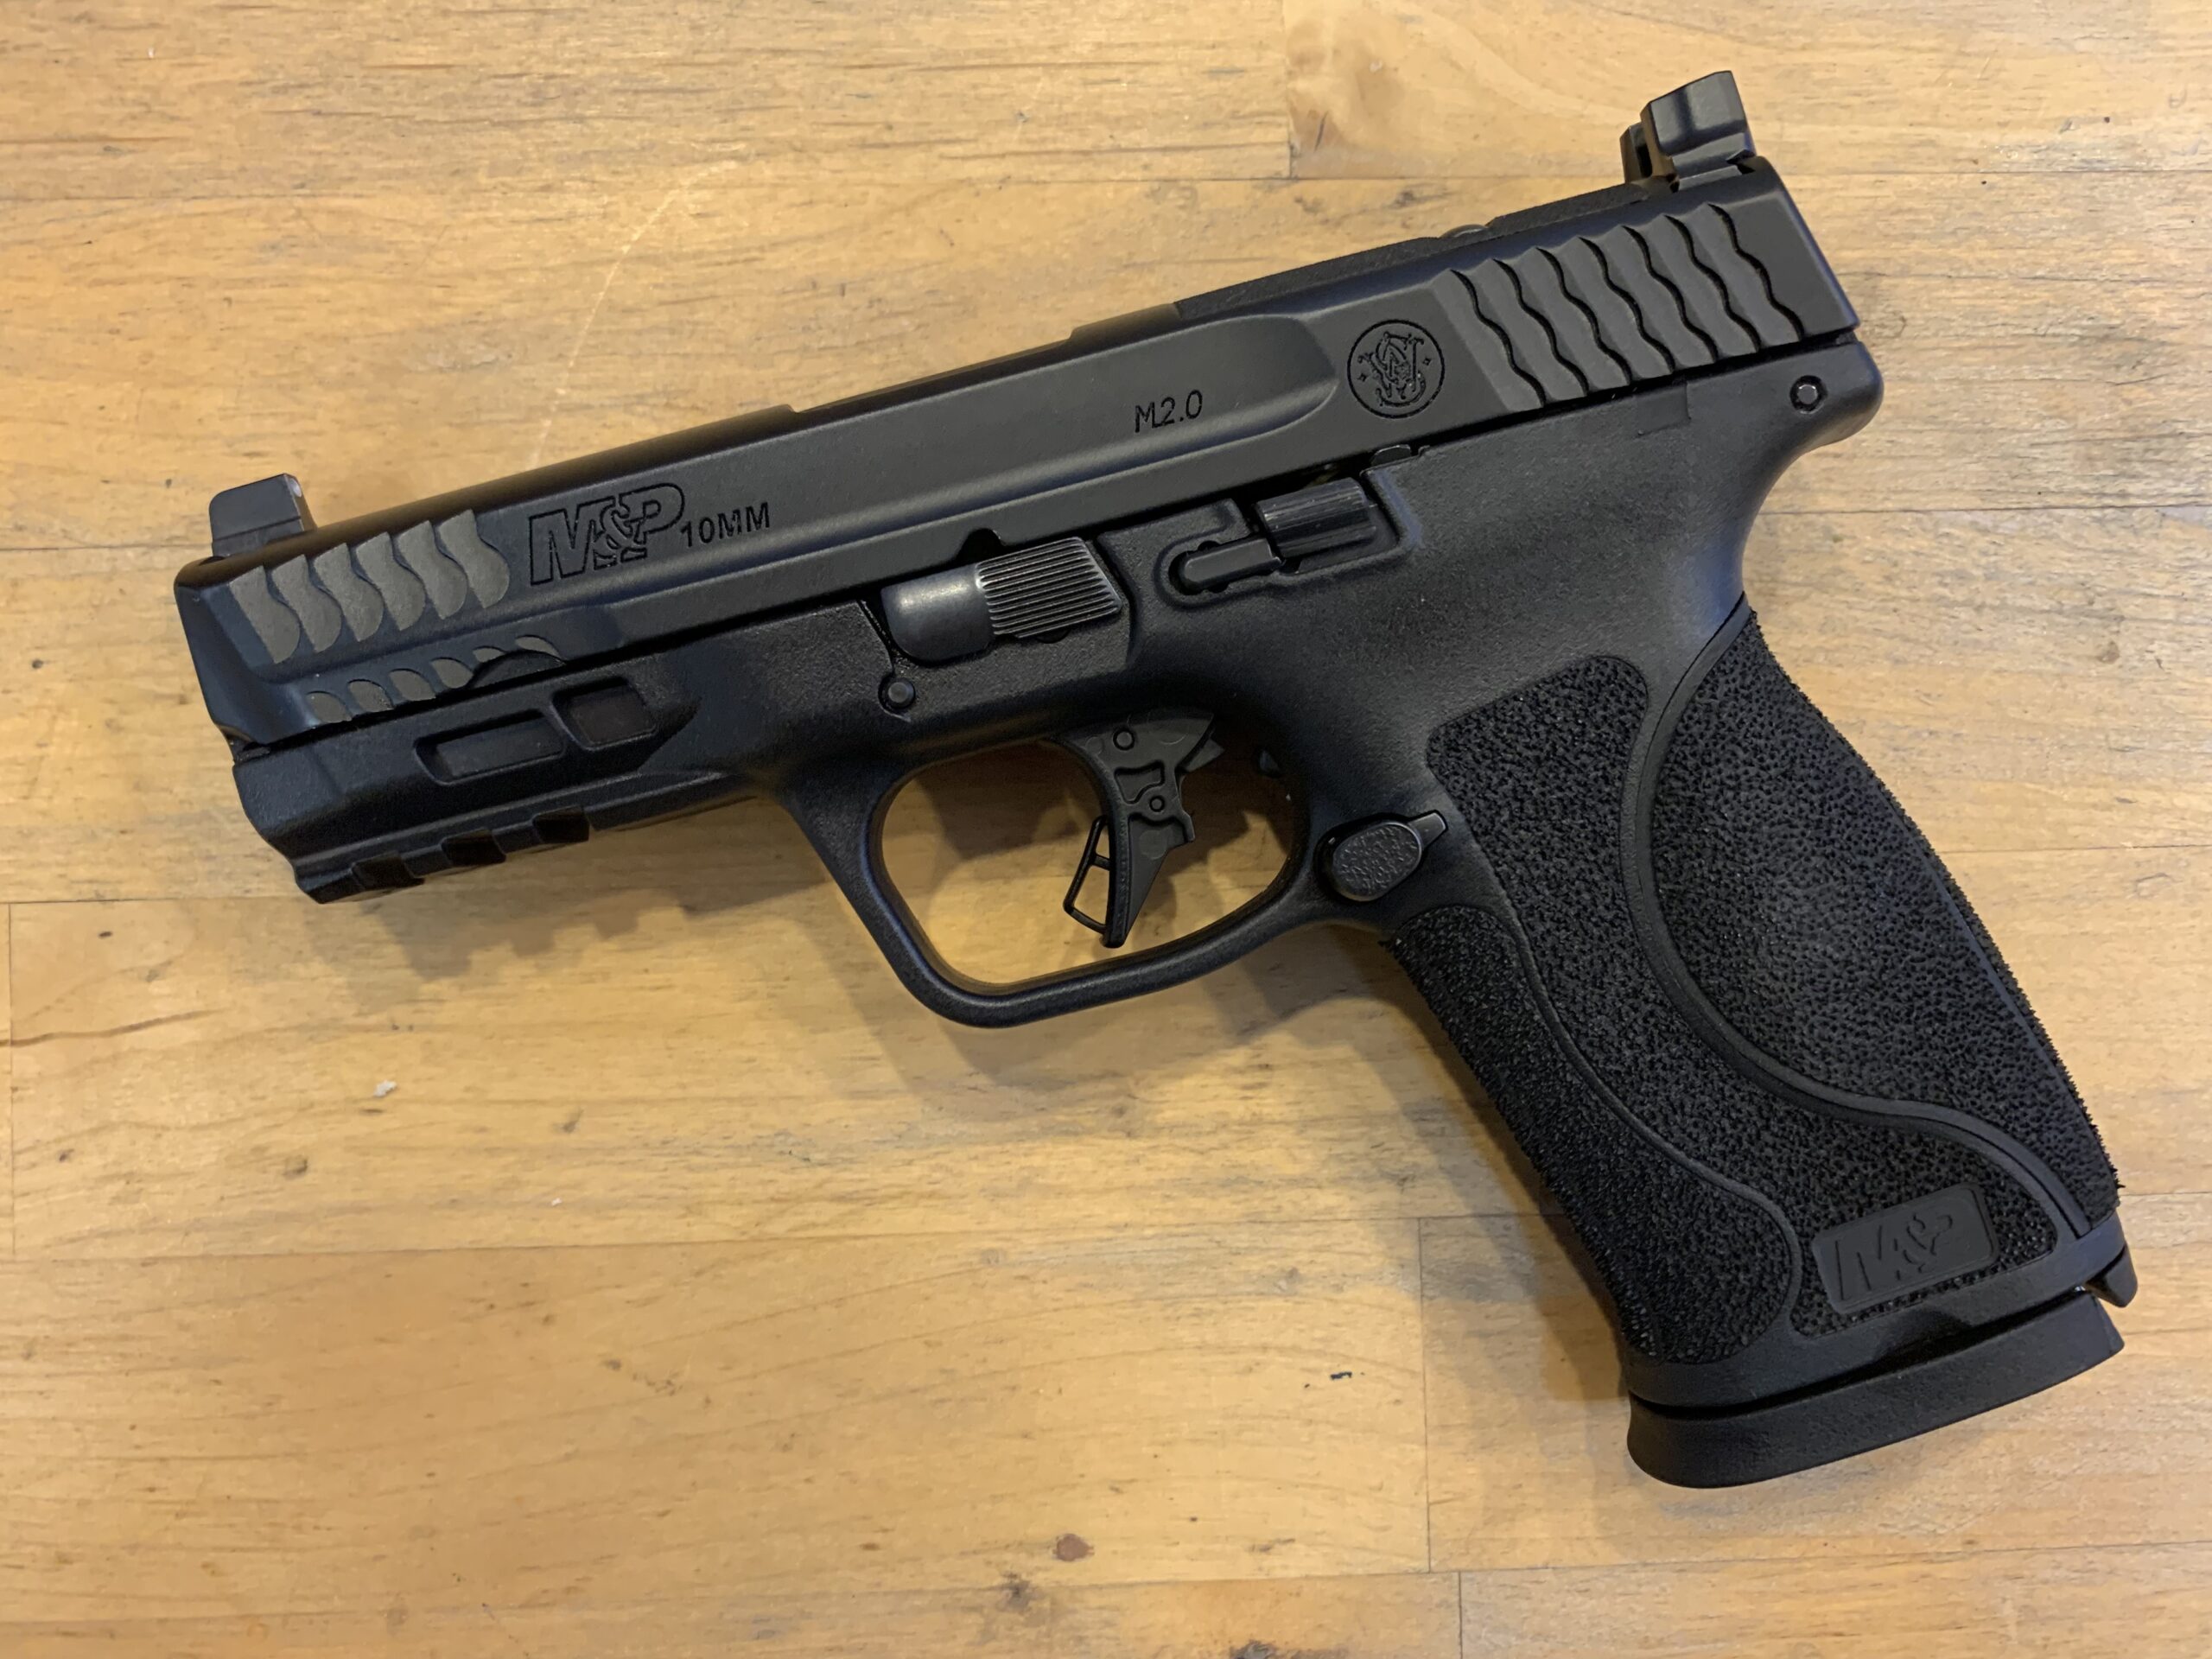 Handgun Review: Smith & Wesson's New M&P M2.0 10mm | Outdoor Life